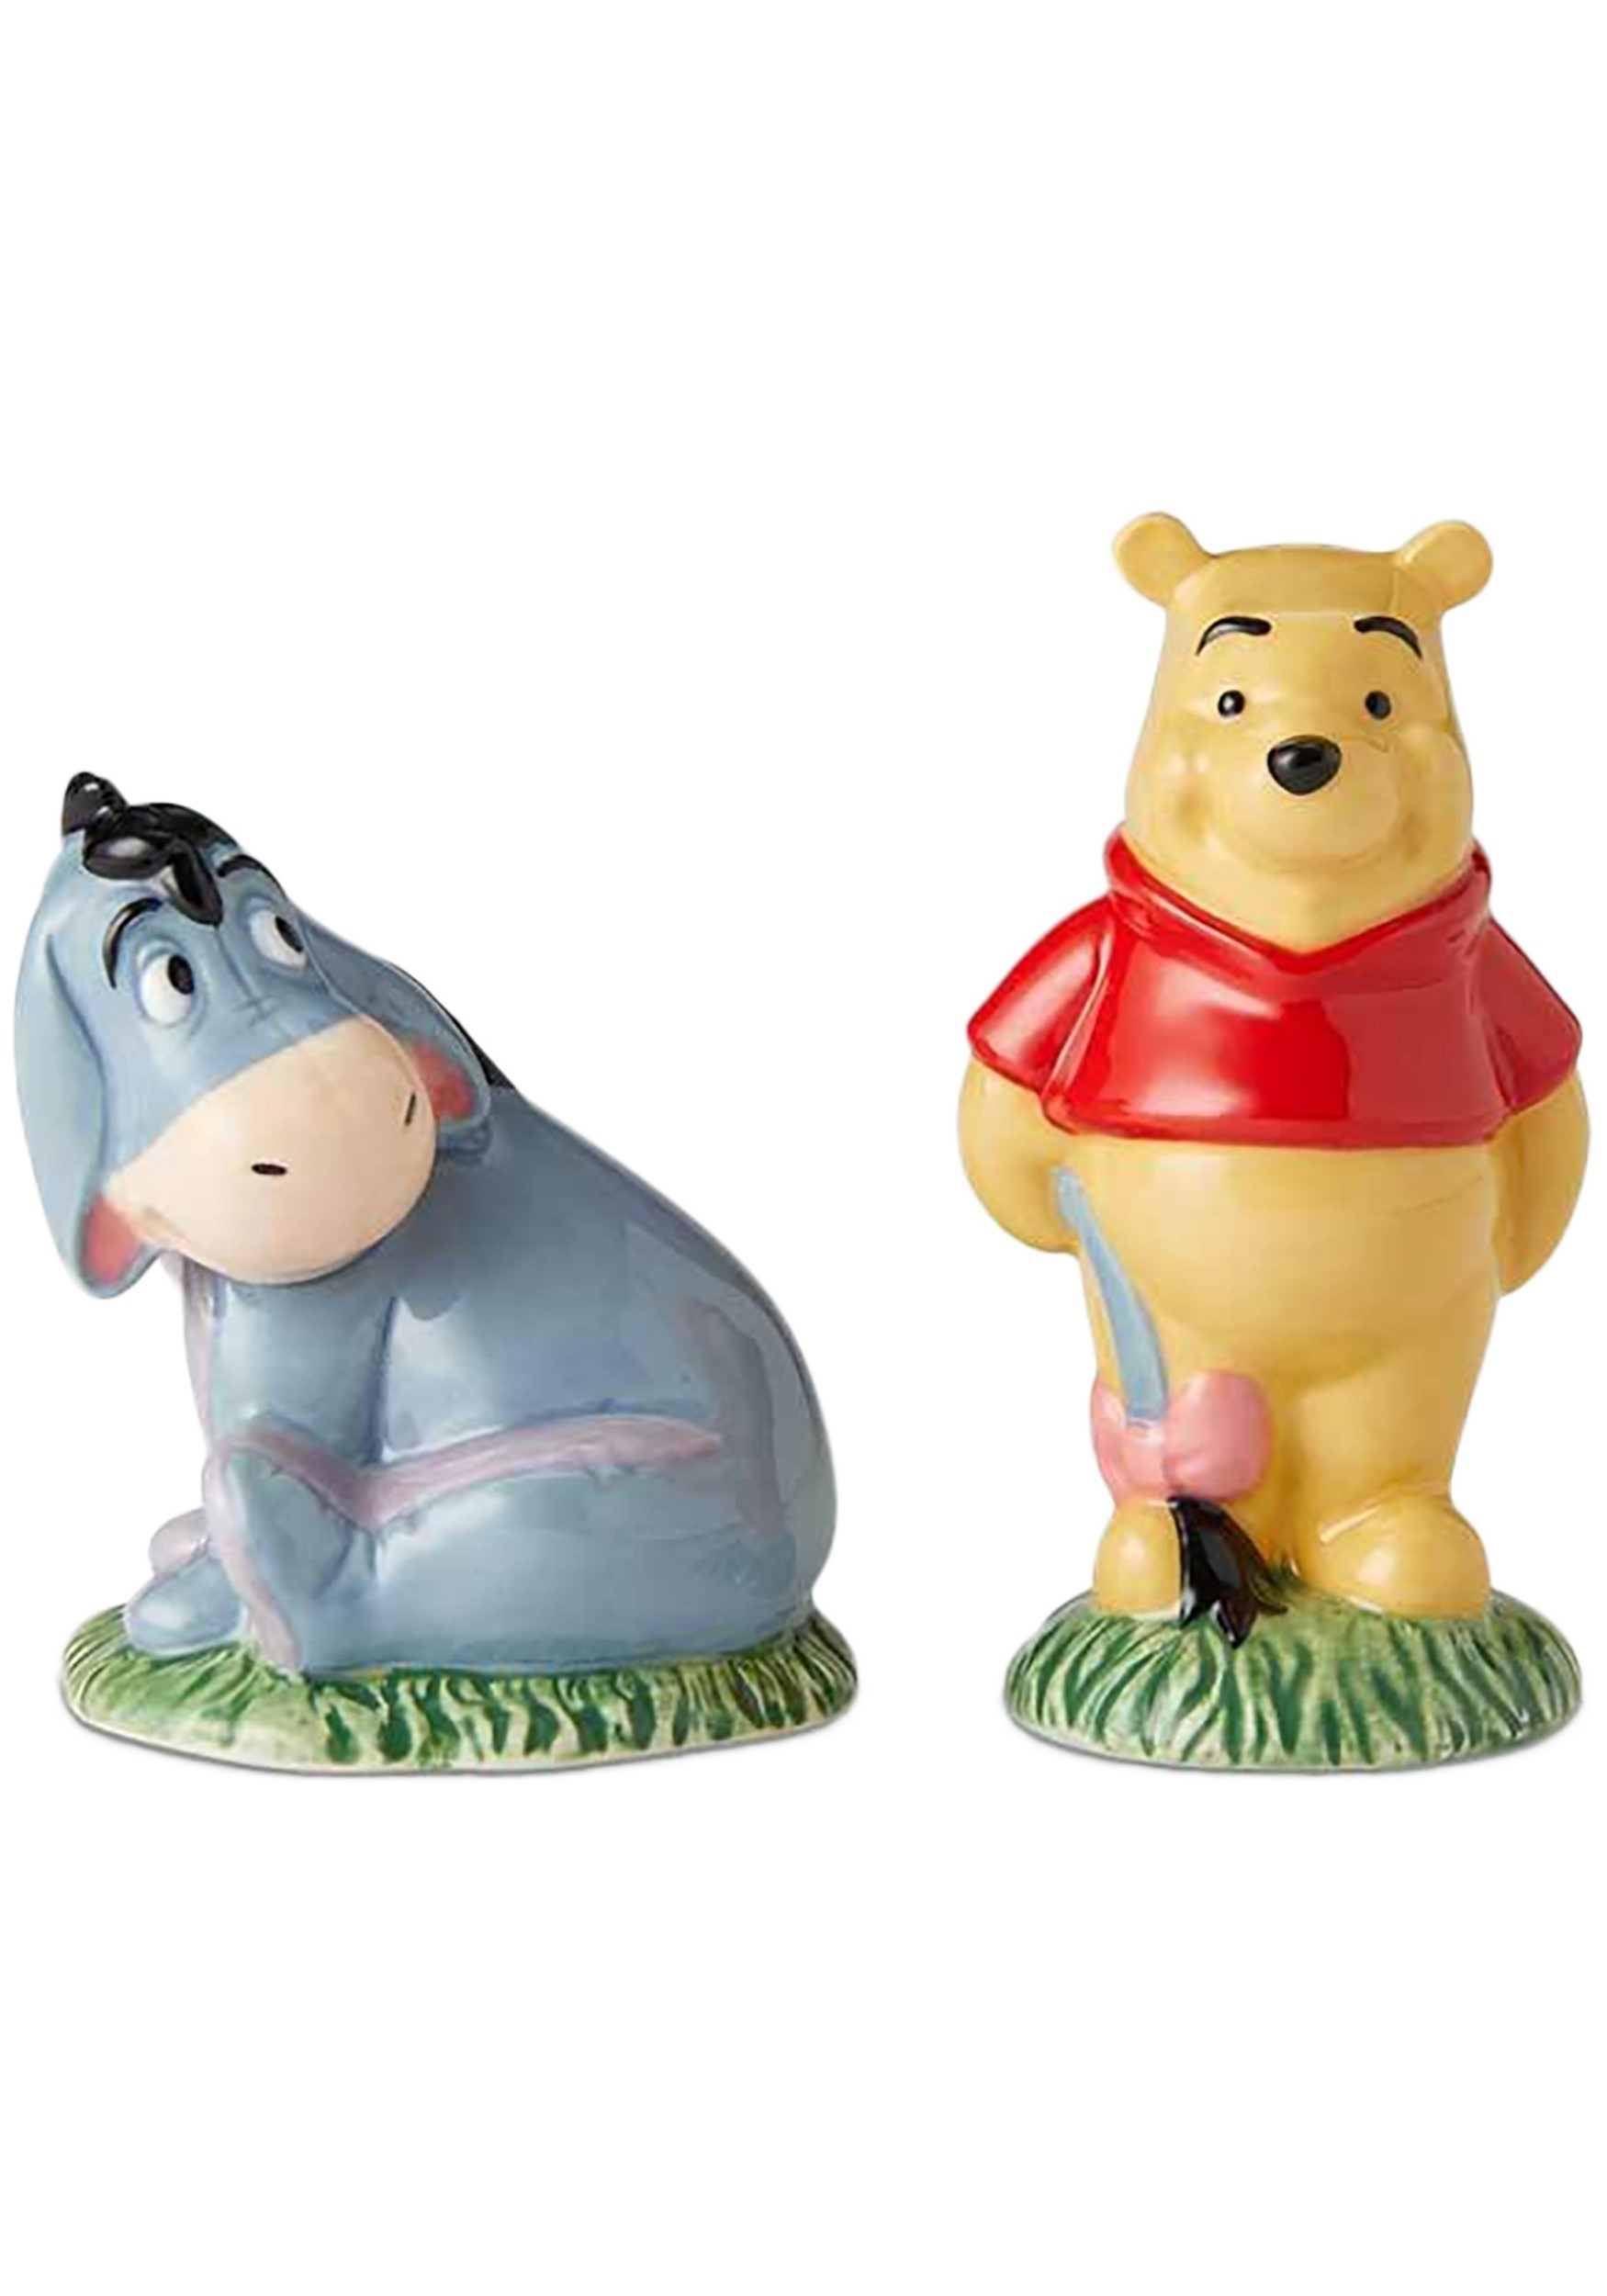 Winnie the Pooh Salt and Pepper Shakers